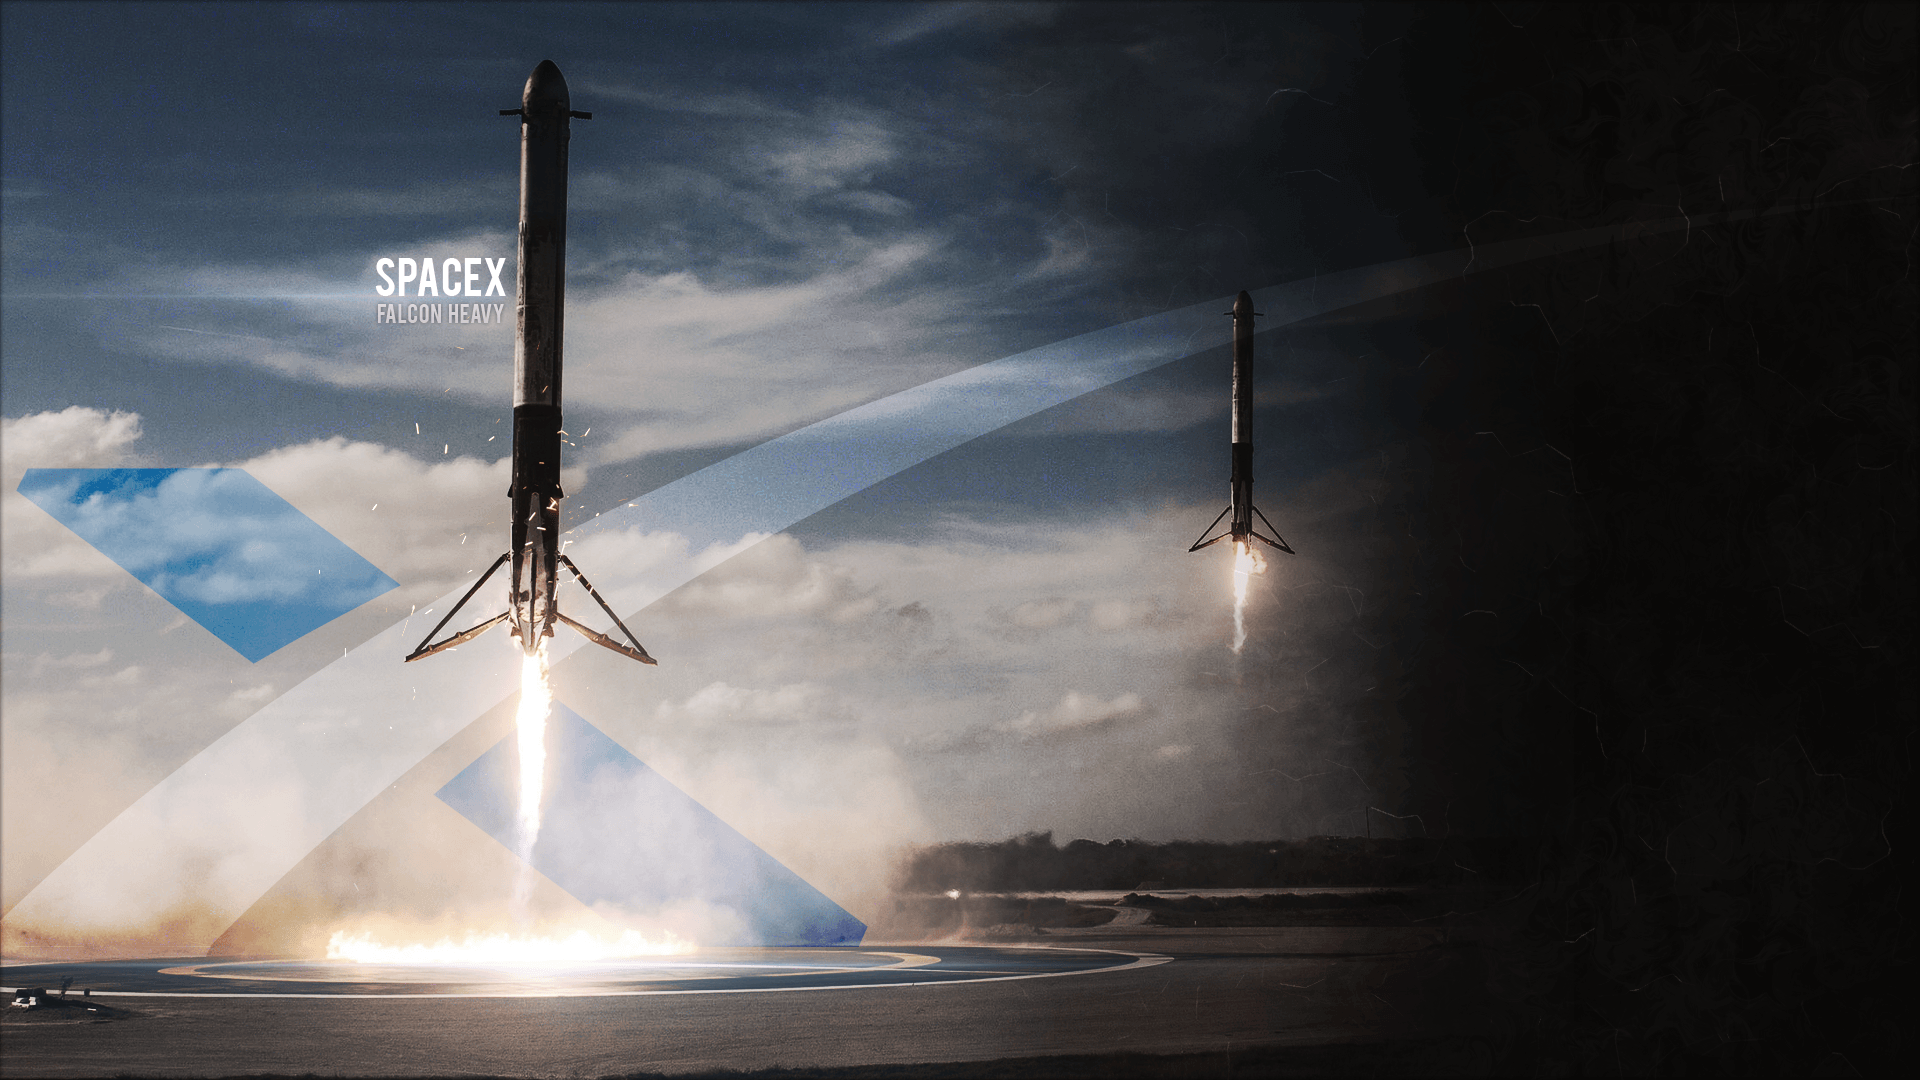 Wallpaper I made of the Falcon Heavy side boosters landing